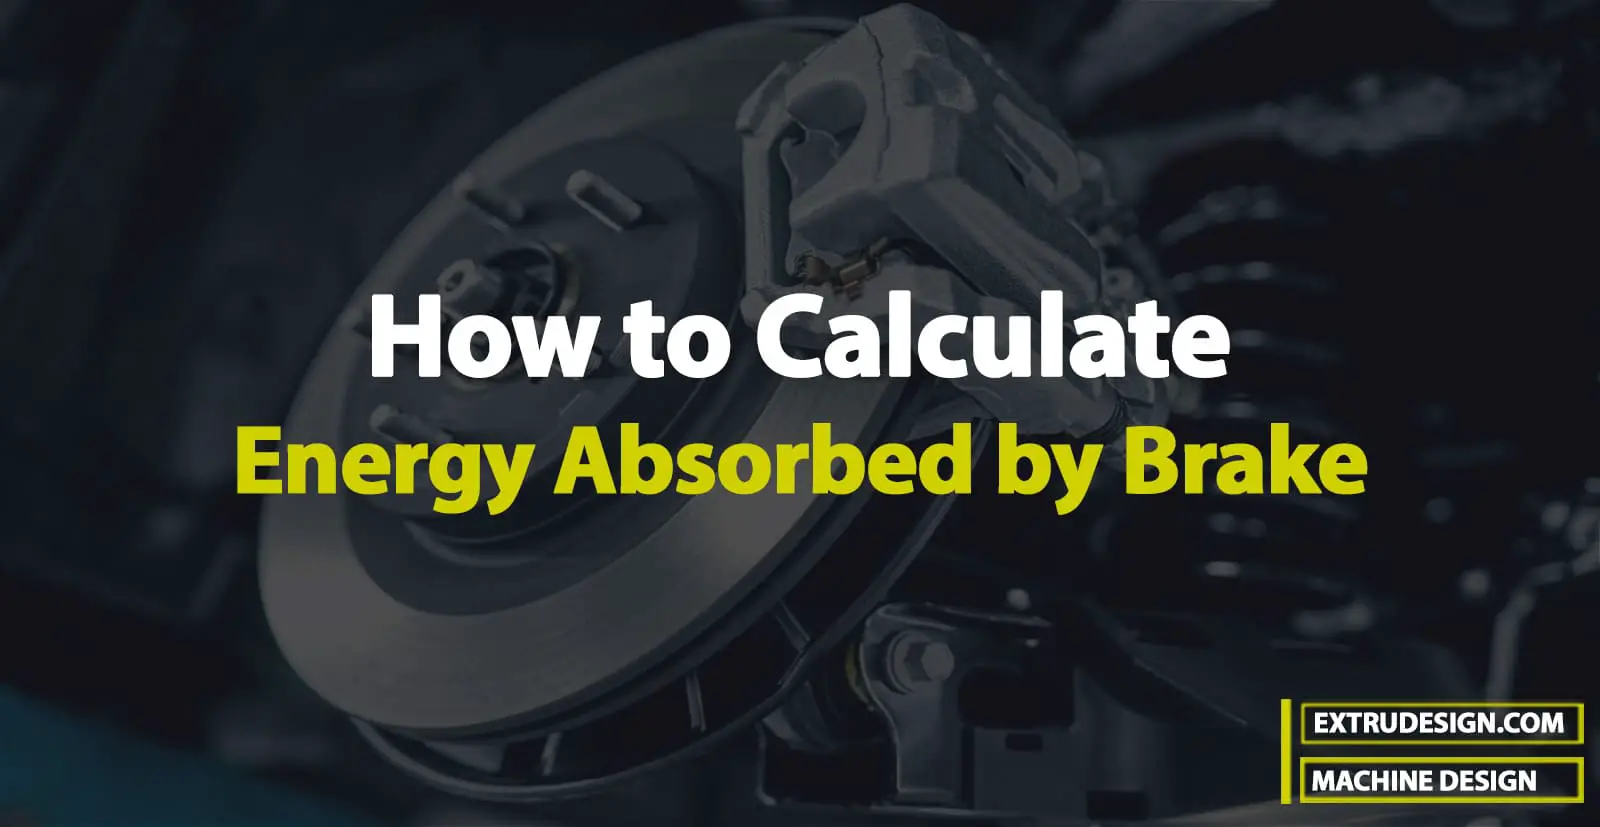 Calculate the Energy Absorbed by a Brake